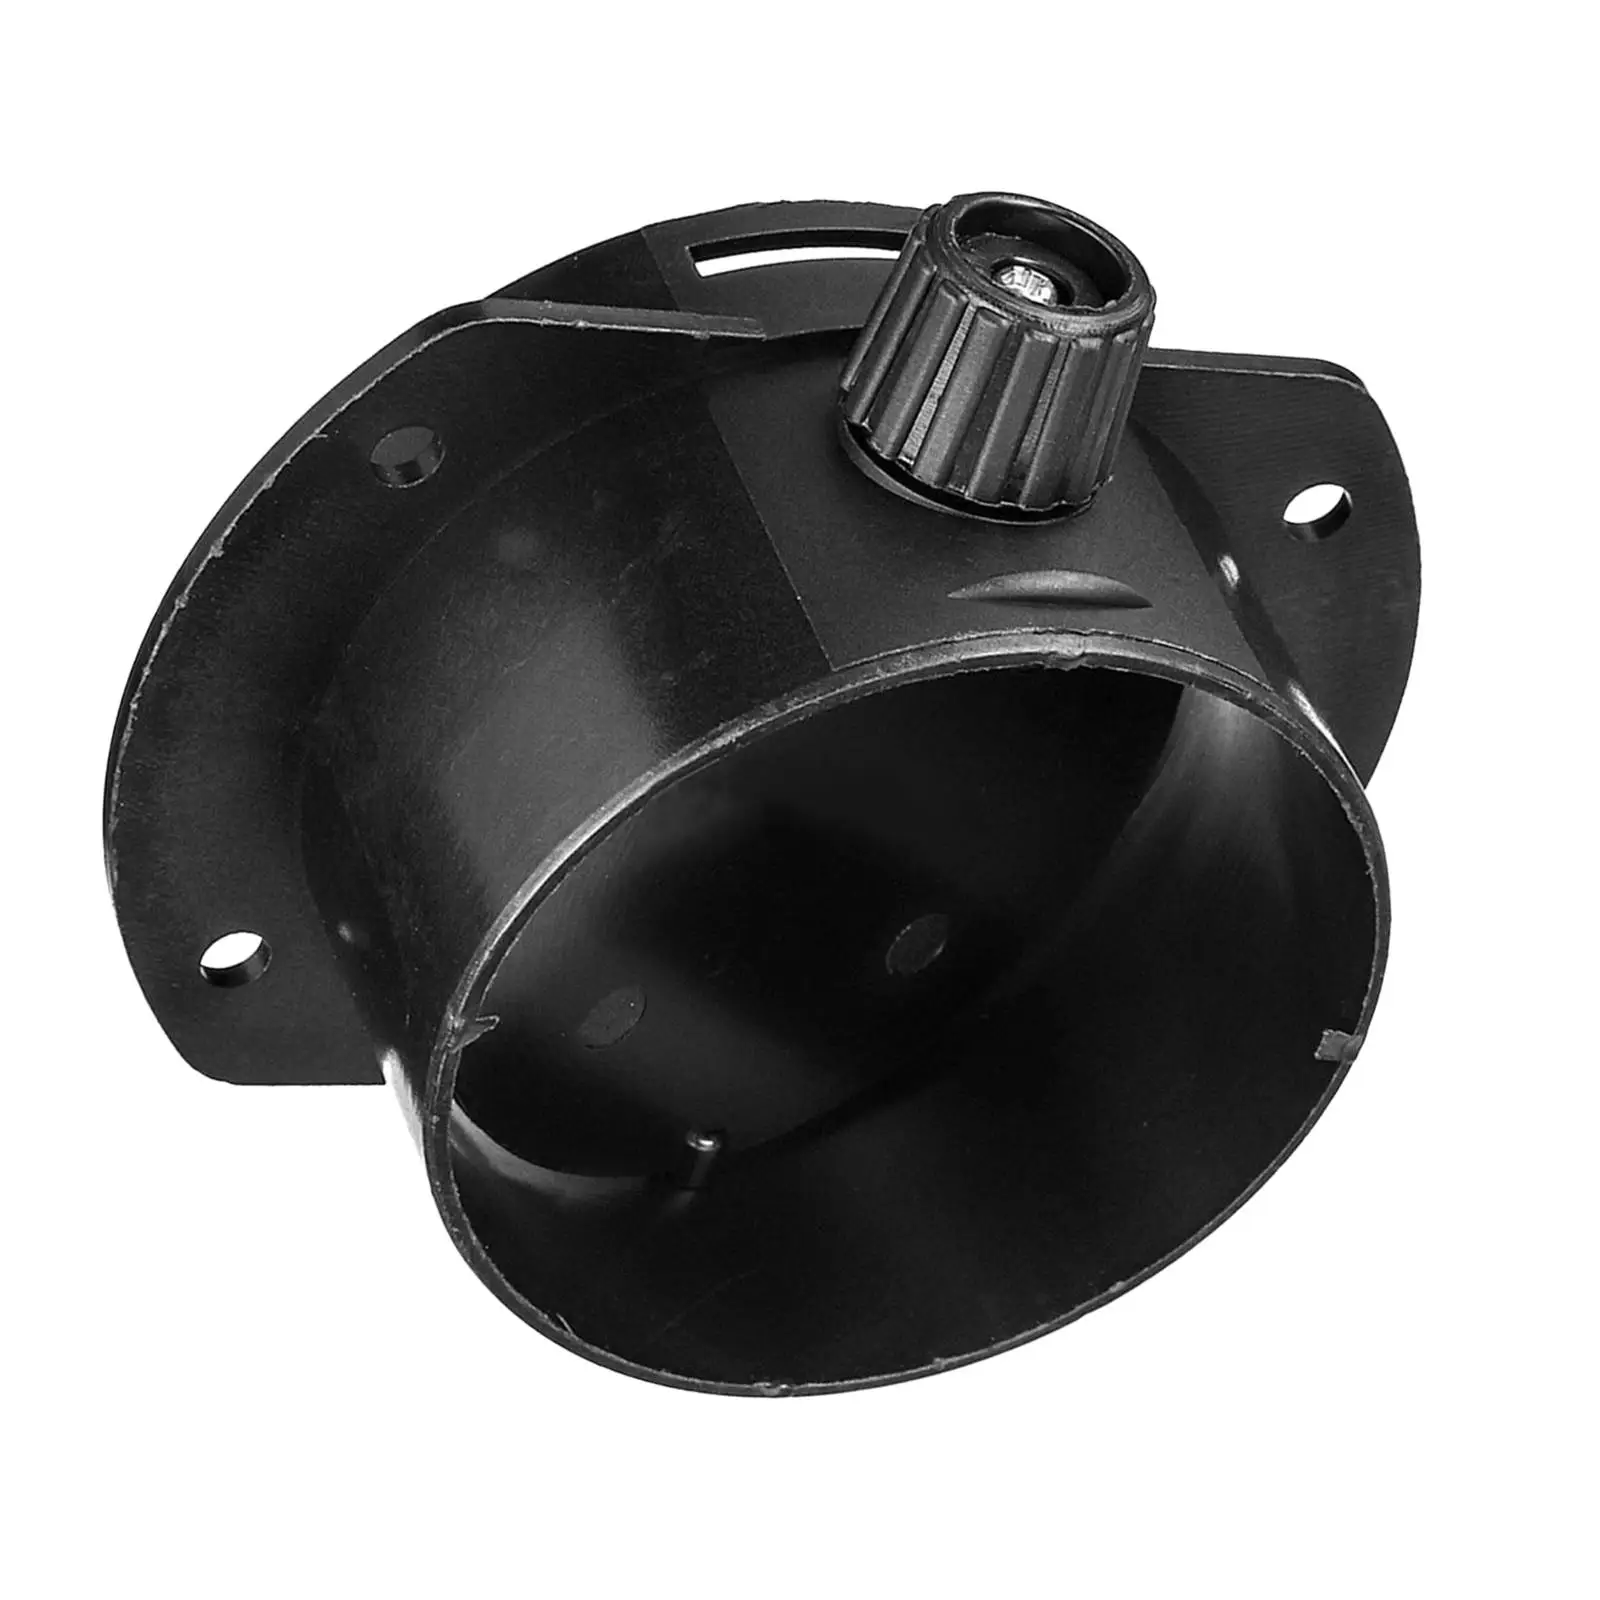 Professional Closeable Open Regulating Valve 60mm for 2kW Parking Heater Vehicles